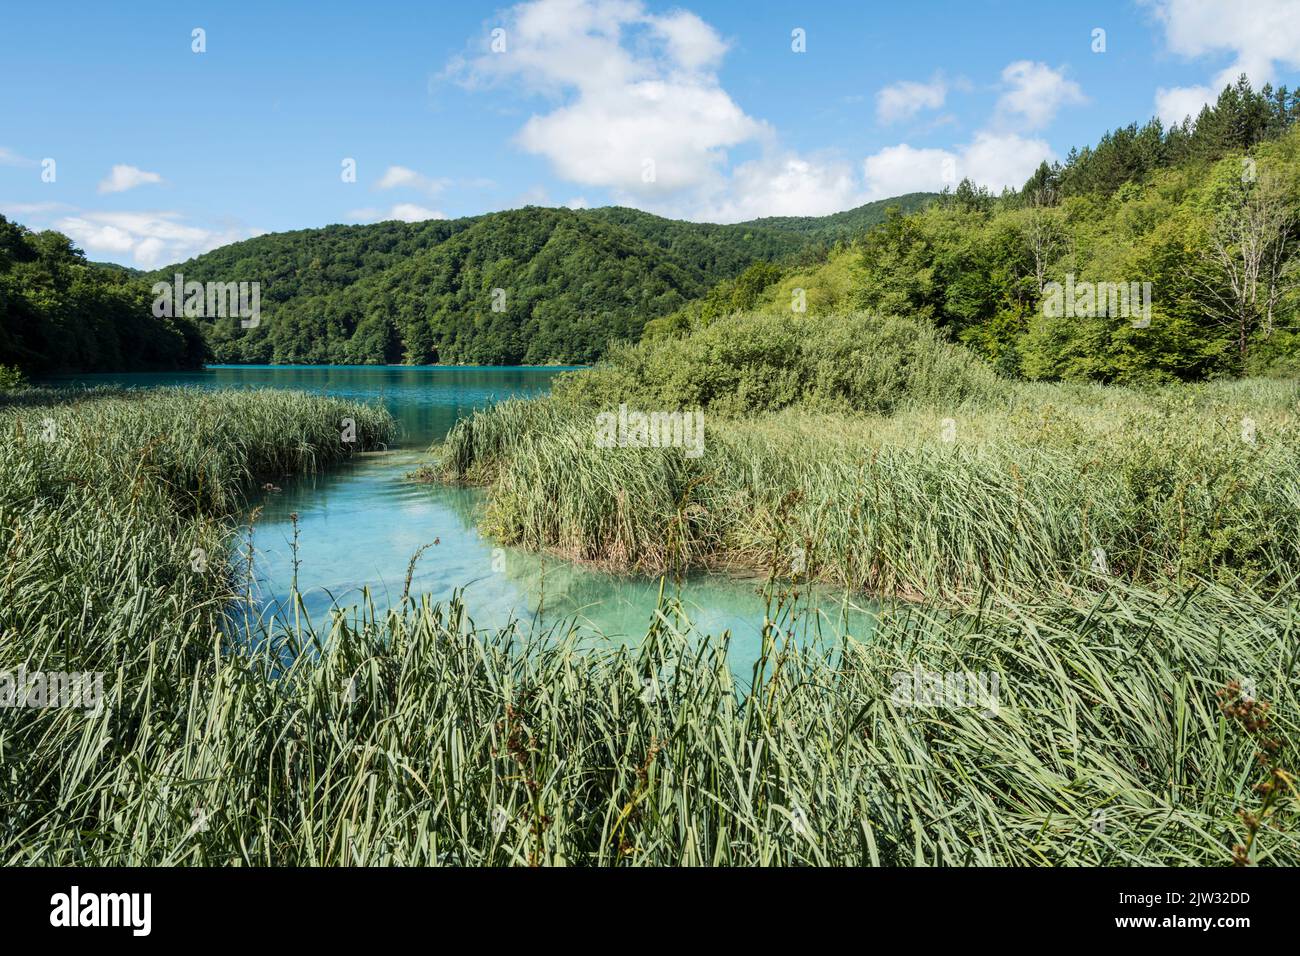 Reed covered shore of a lake in Plitvice Lakes National Park, Croatia, Europe. Stock Photo